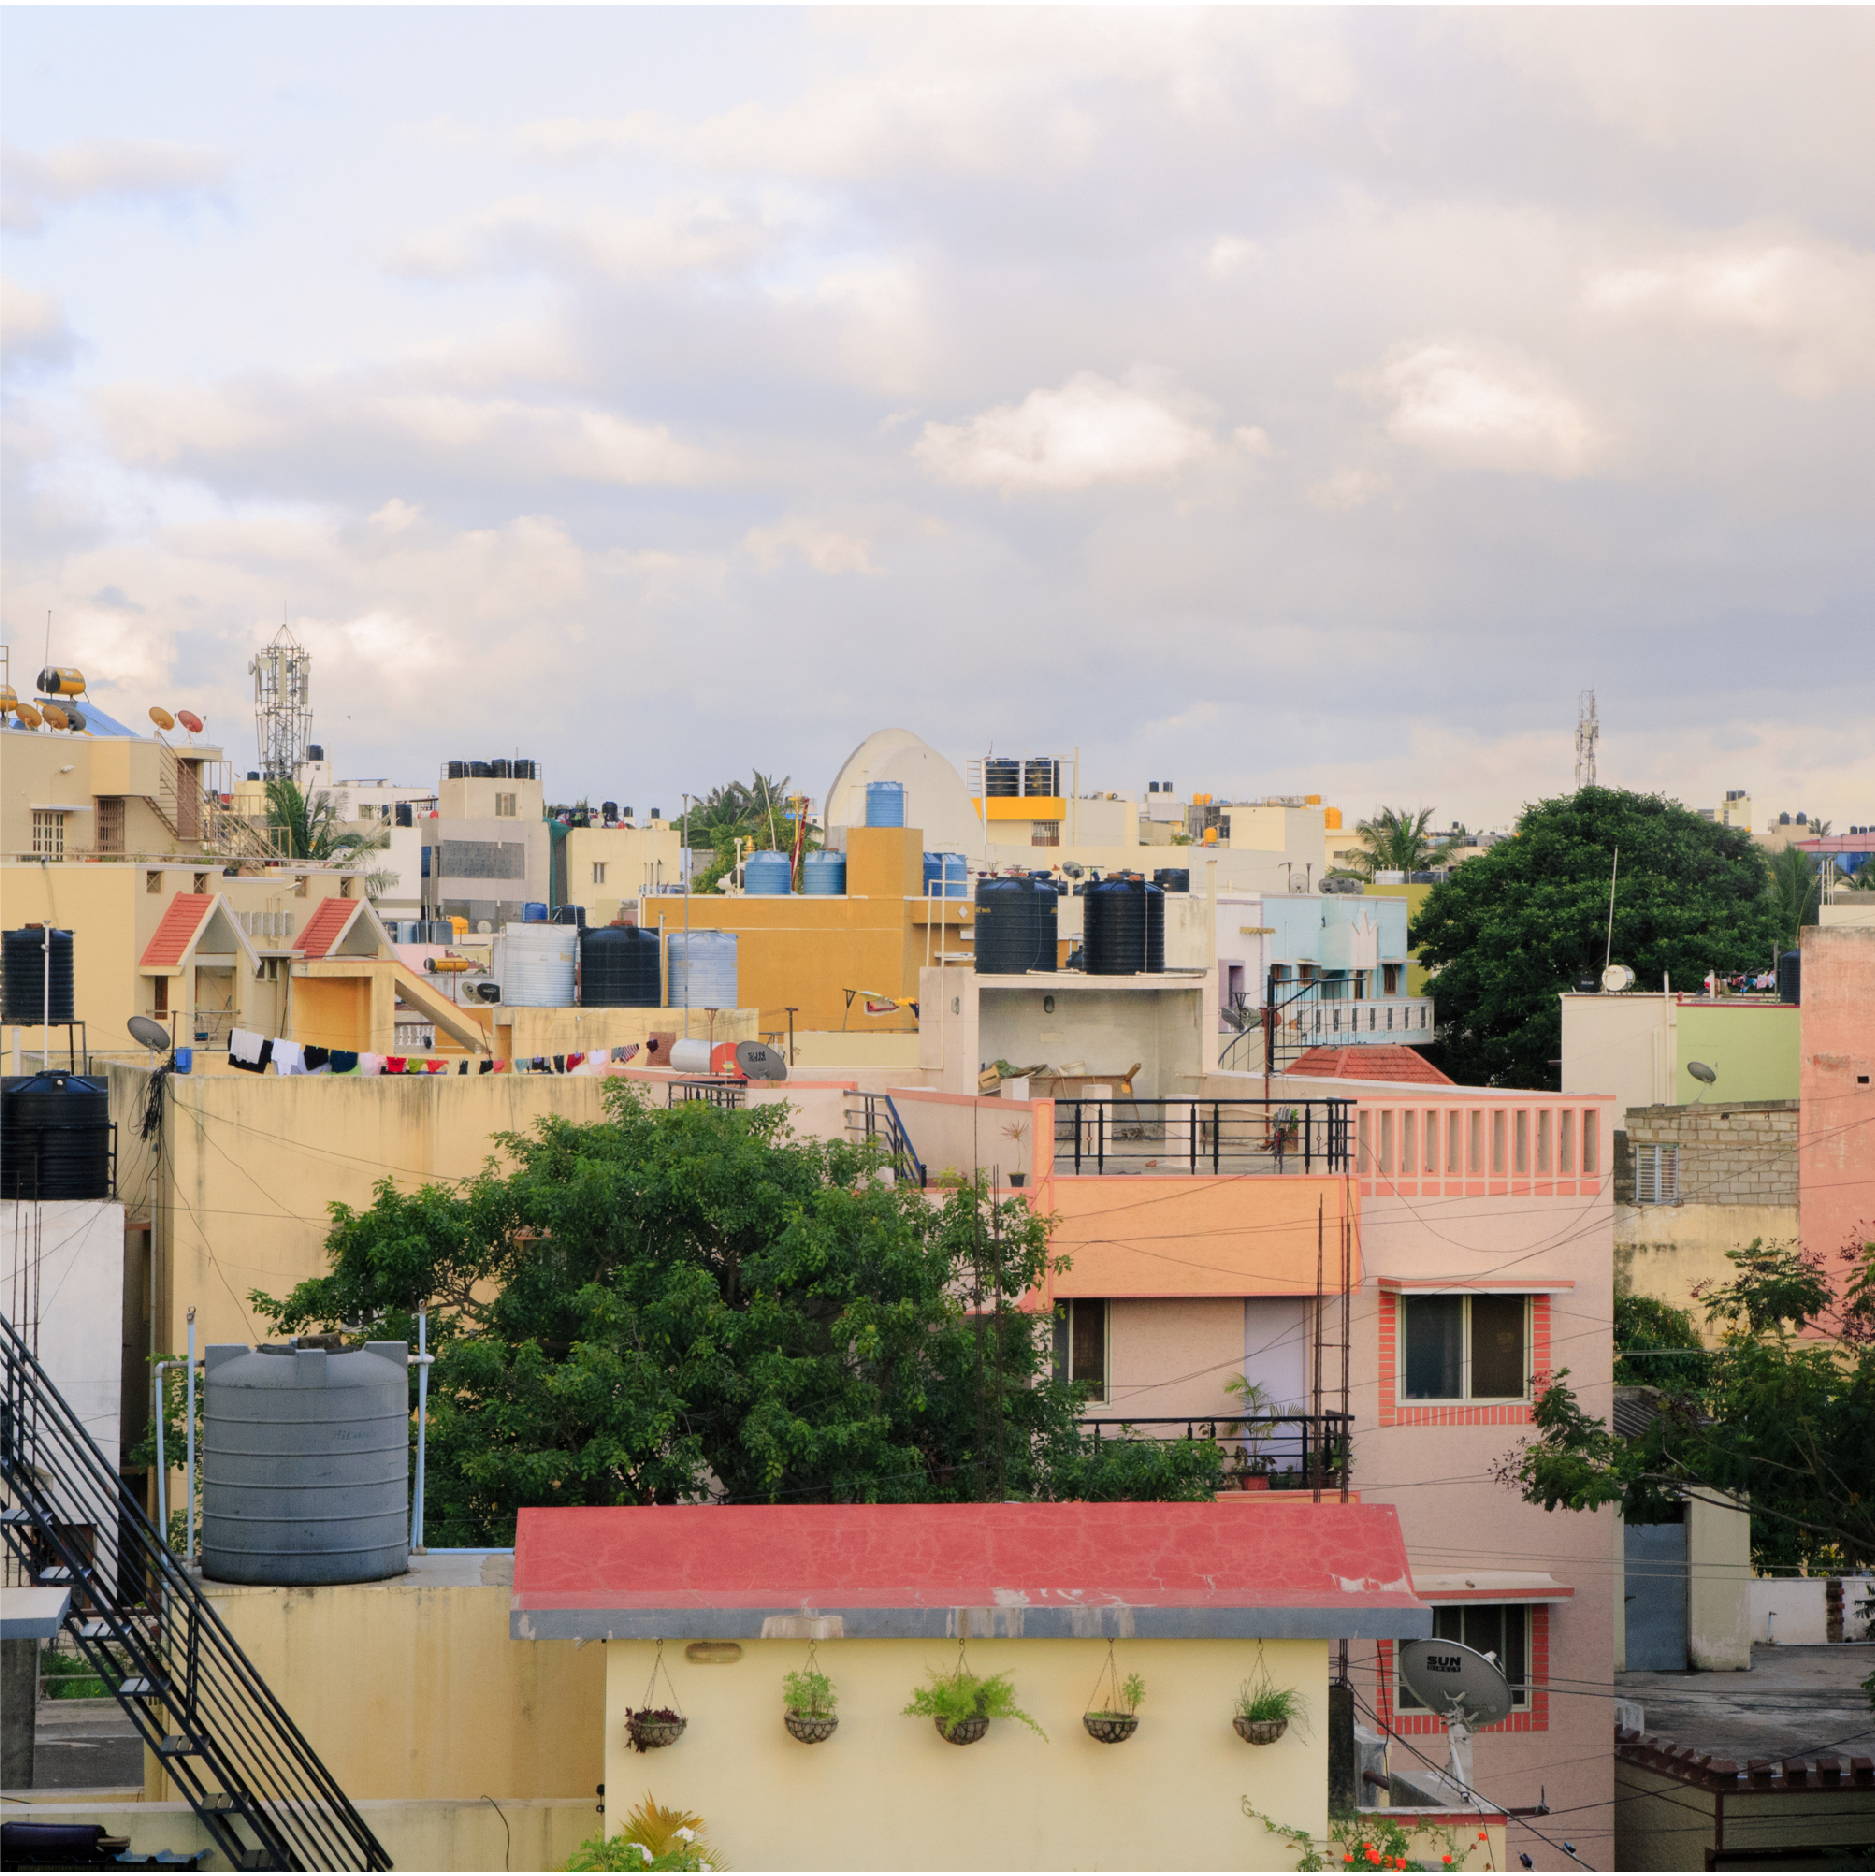 The sun sets across a crowded and colorful Indian neighborhood in Bangalore India. 